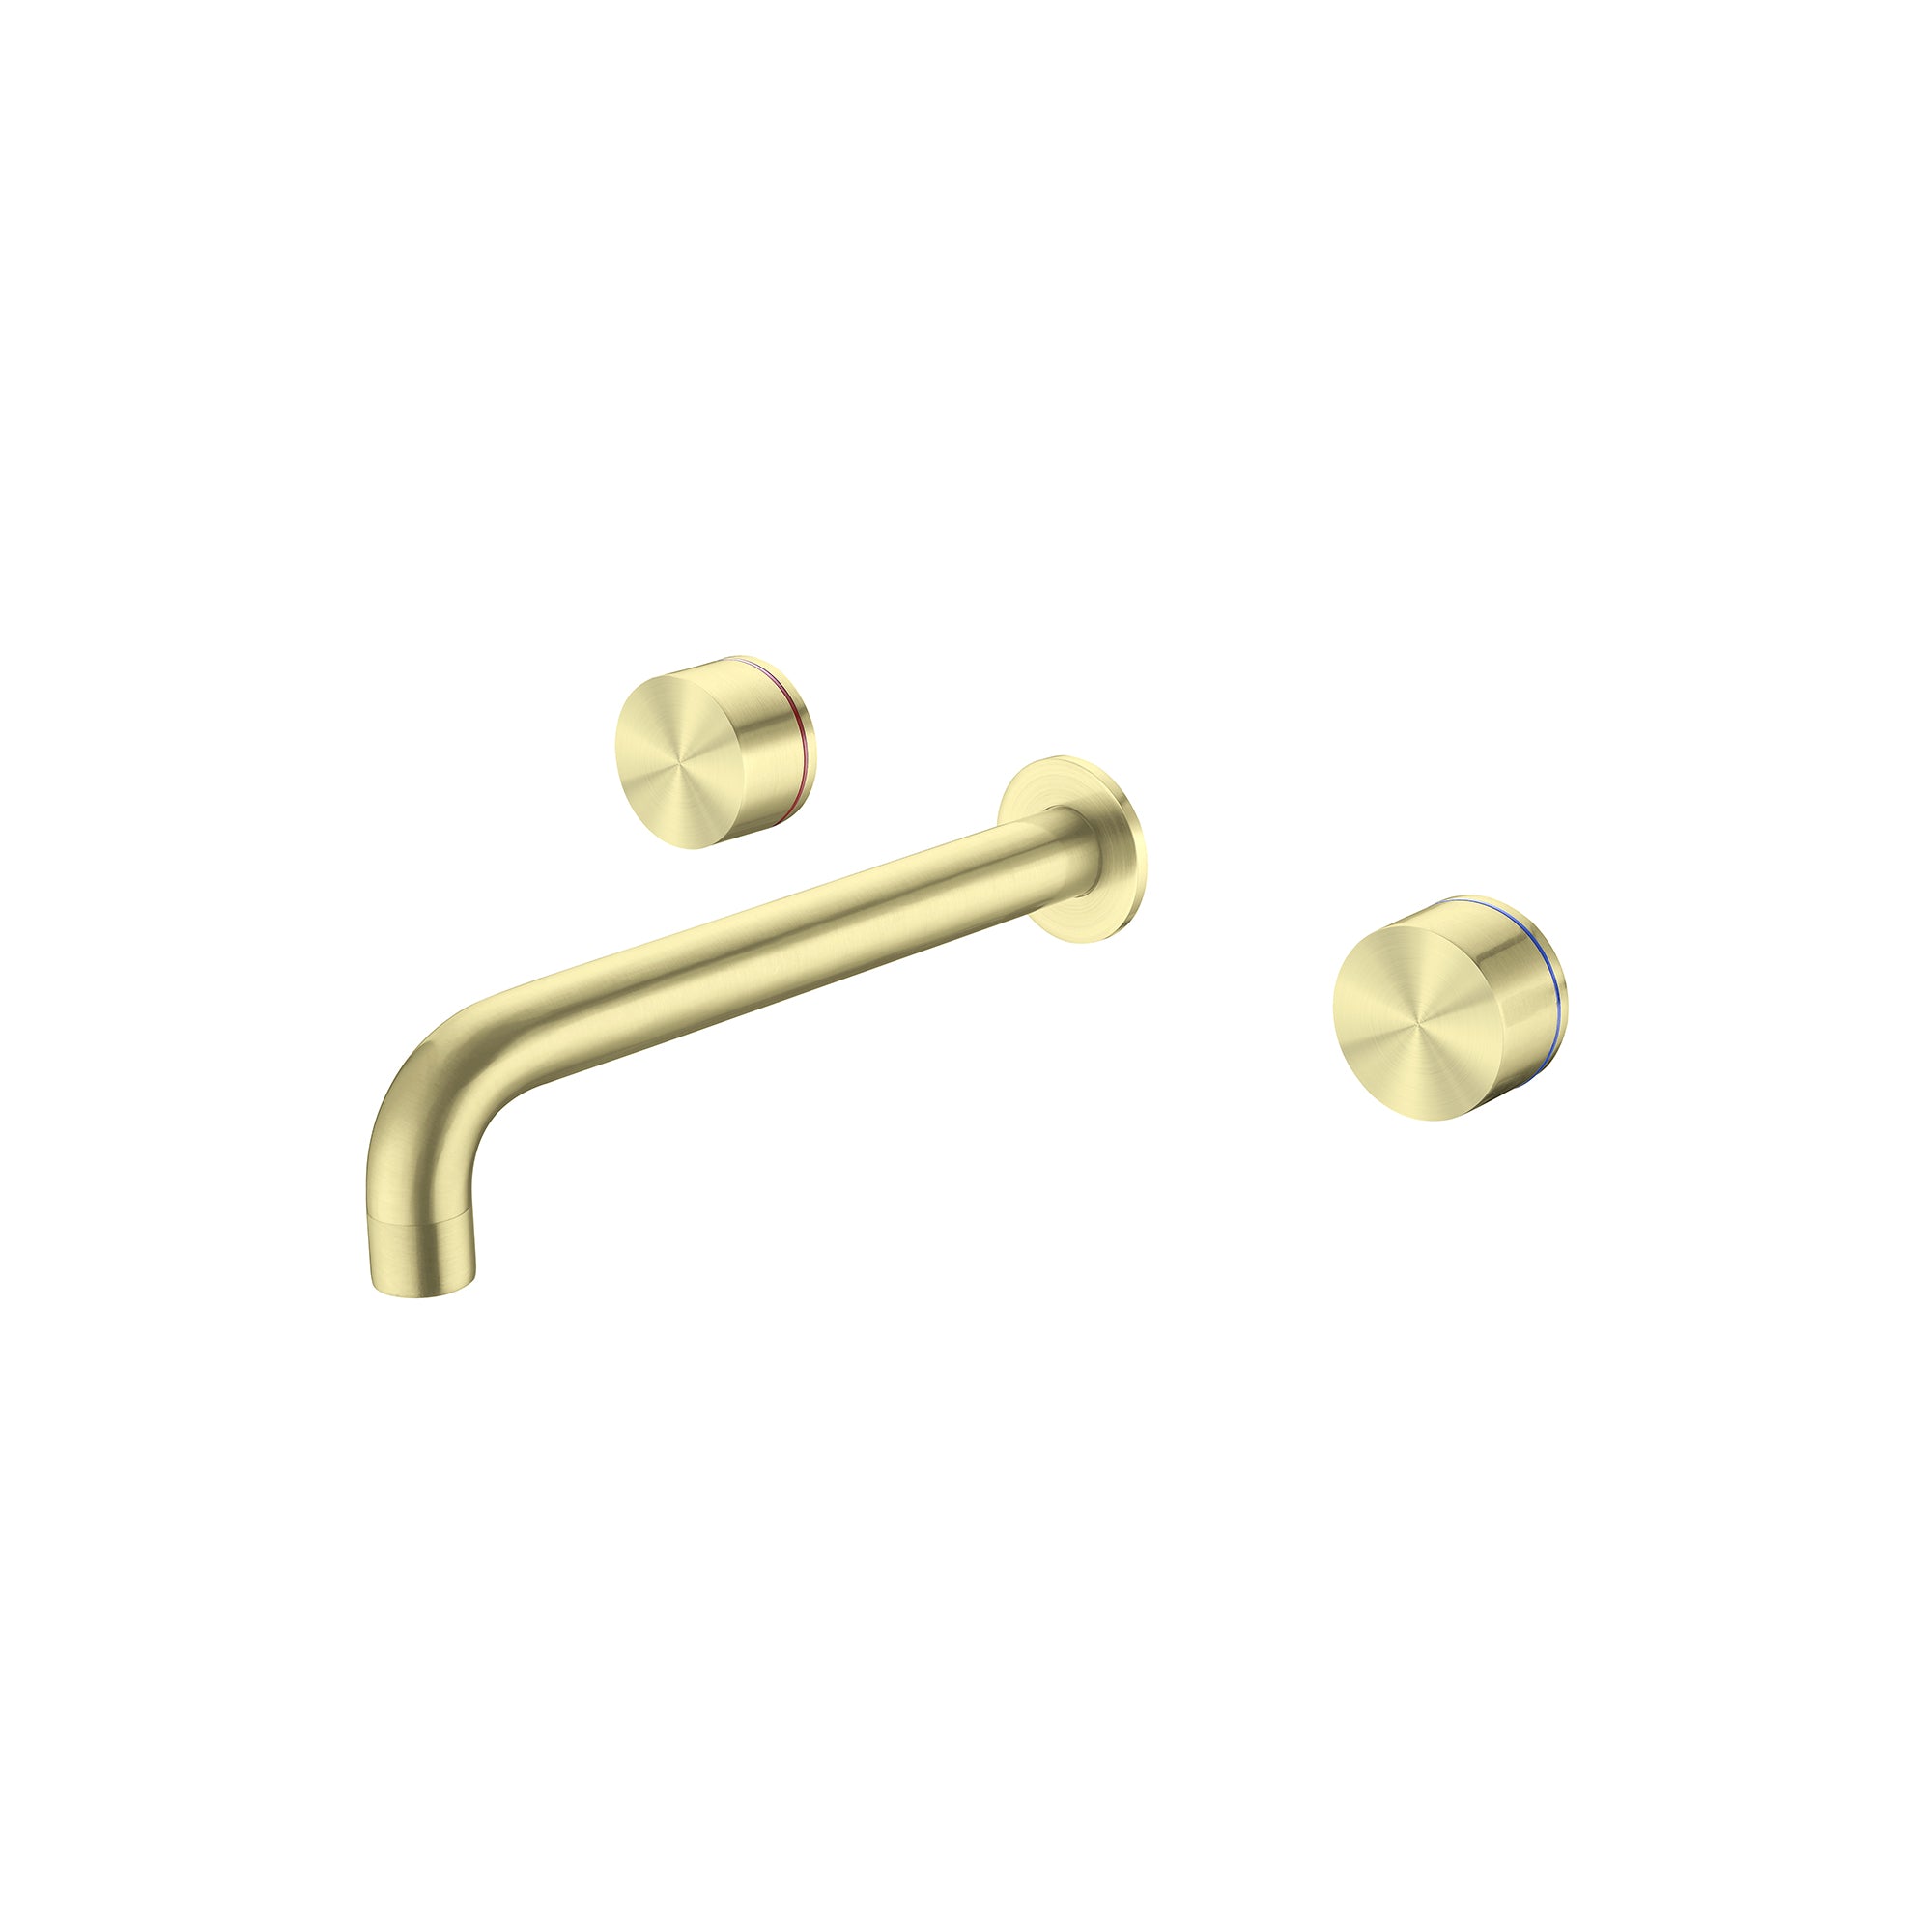 NERO KARA WALL BASIN SET BRUSHED GOLD (AVAILABLE IN 180MM AND 217MM)